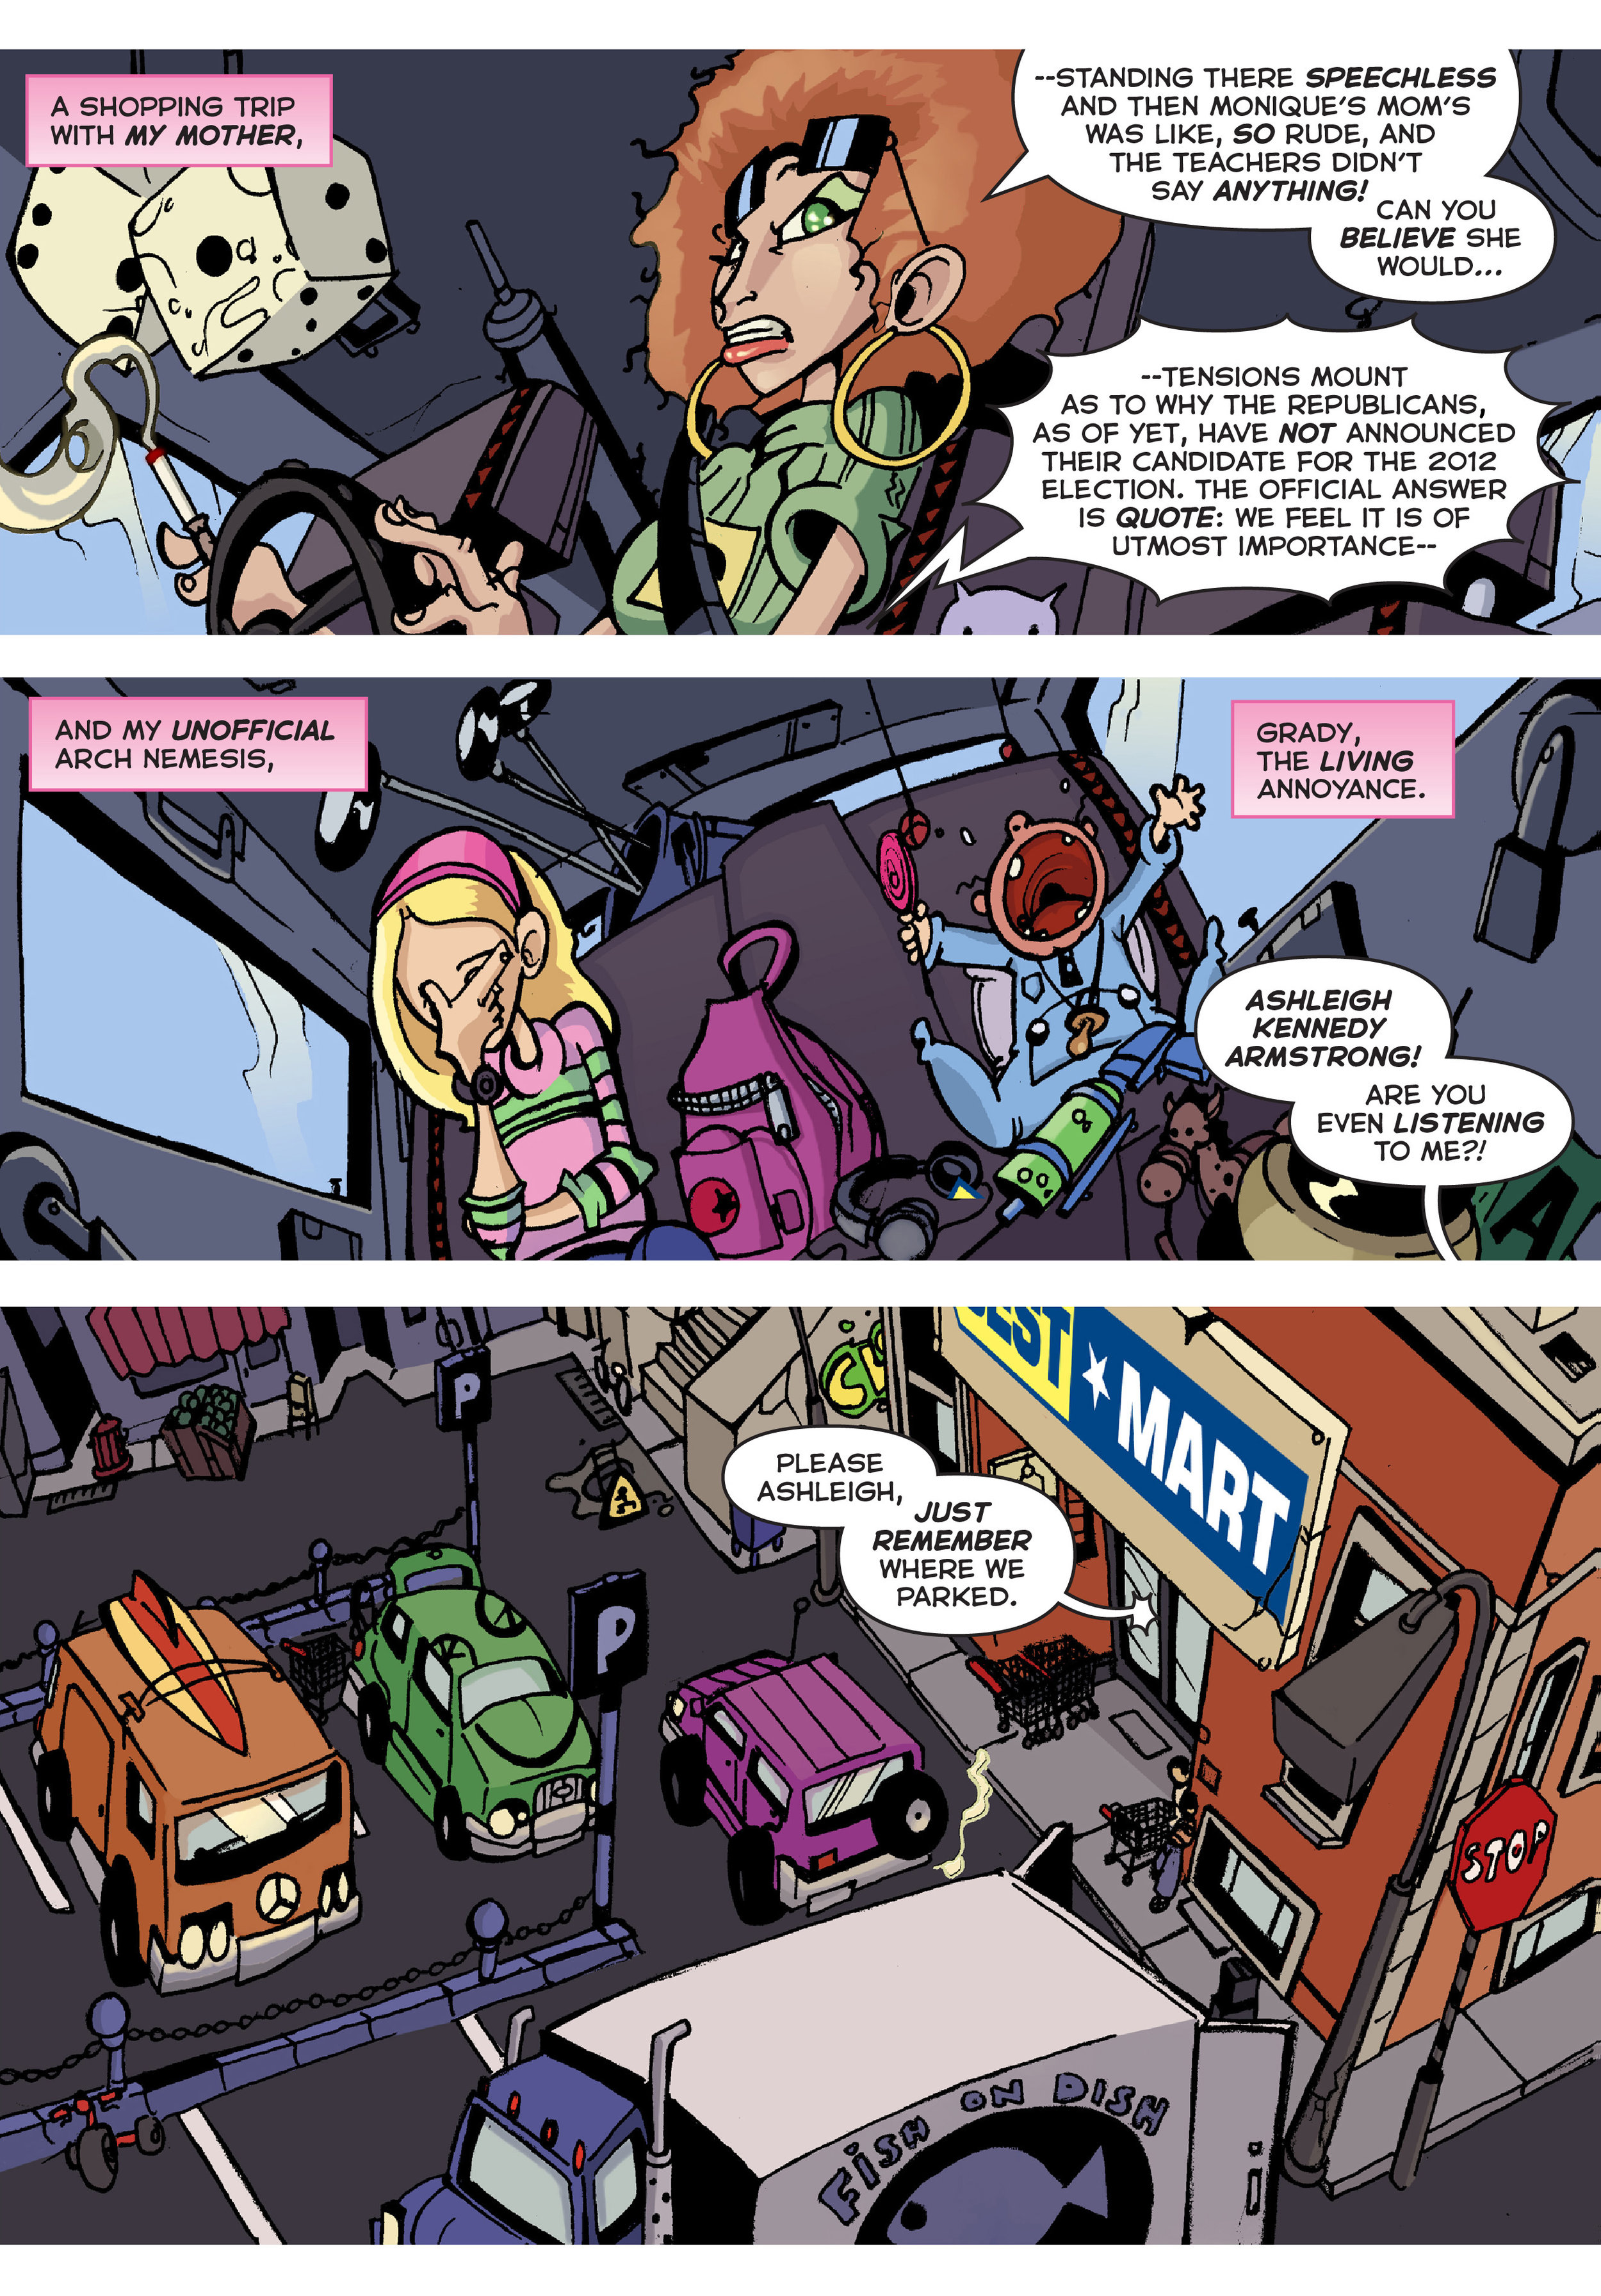 Pink Power 1 page 2.jpg